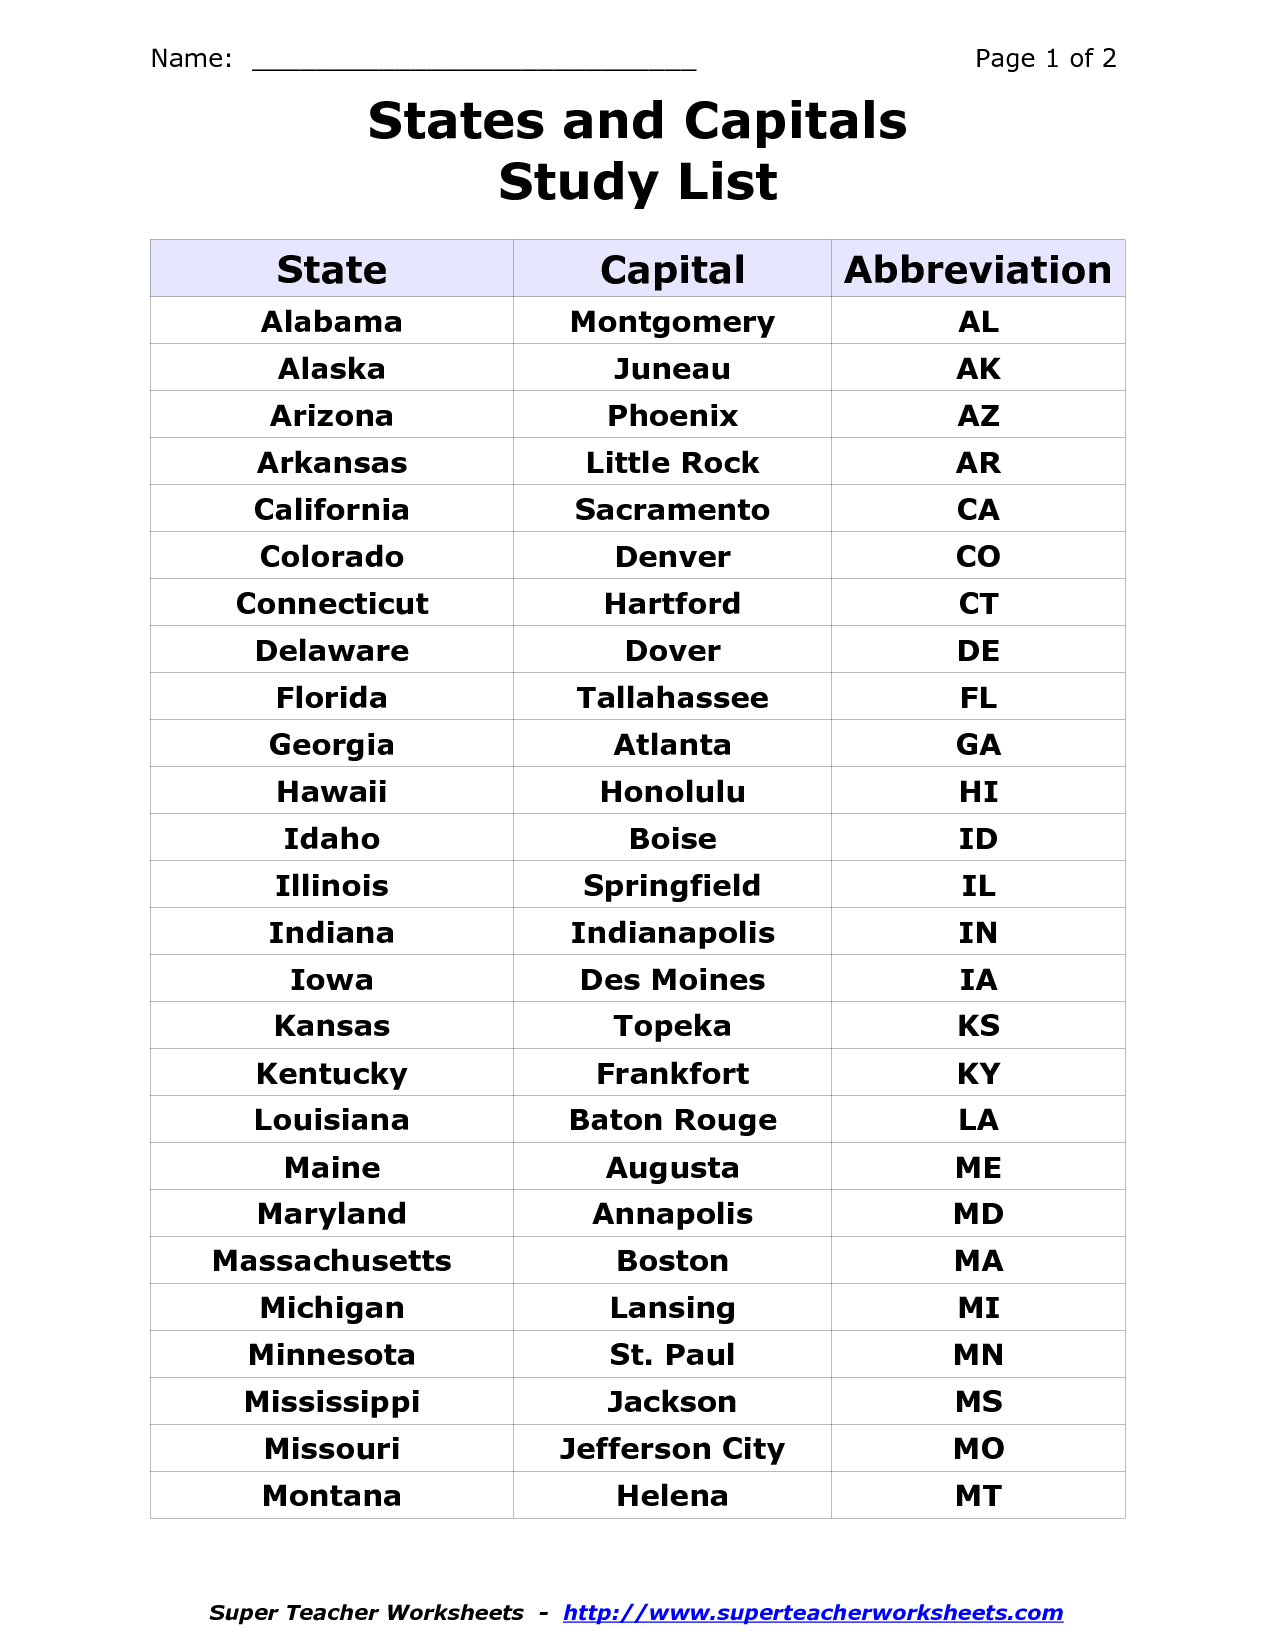 printable-list-of-50-states-and-capitals-this-list-also-provides-the